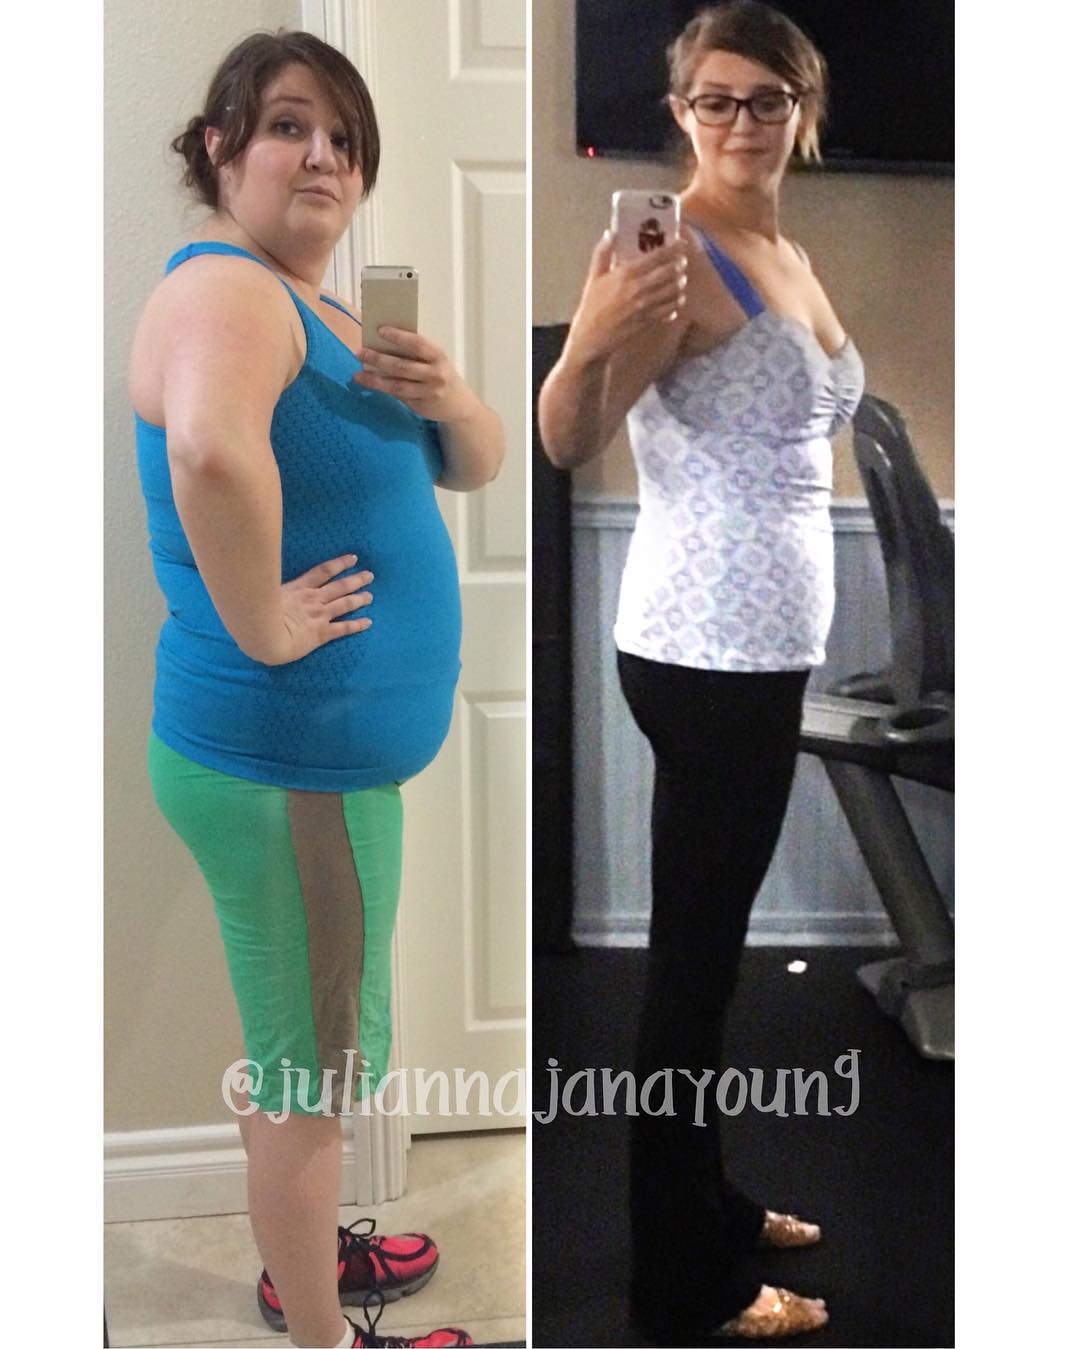 Julianna Young's Insane 80lb Transformation - A Warrior's Journey! 5